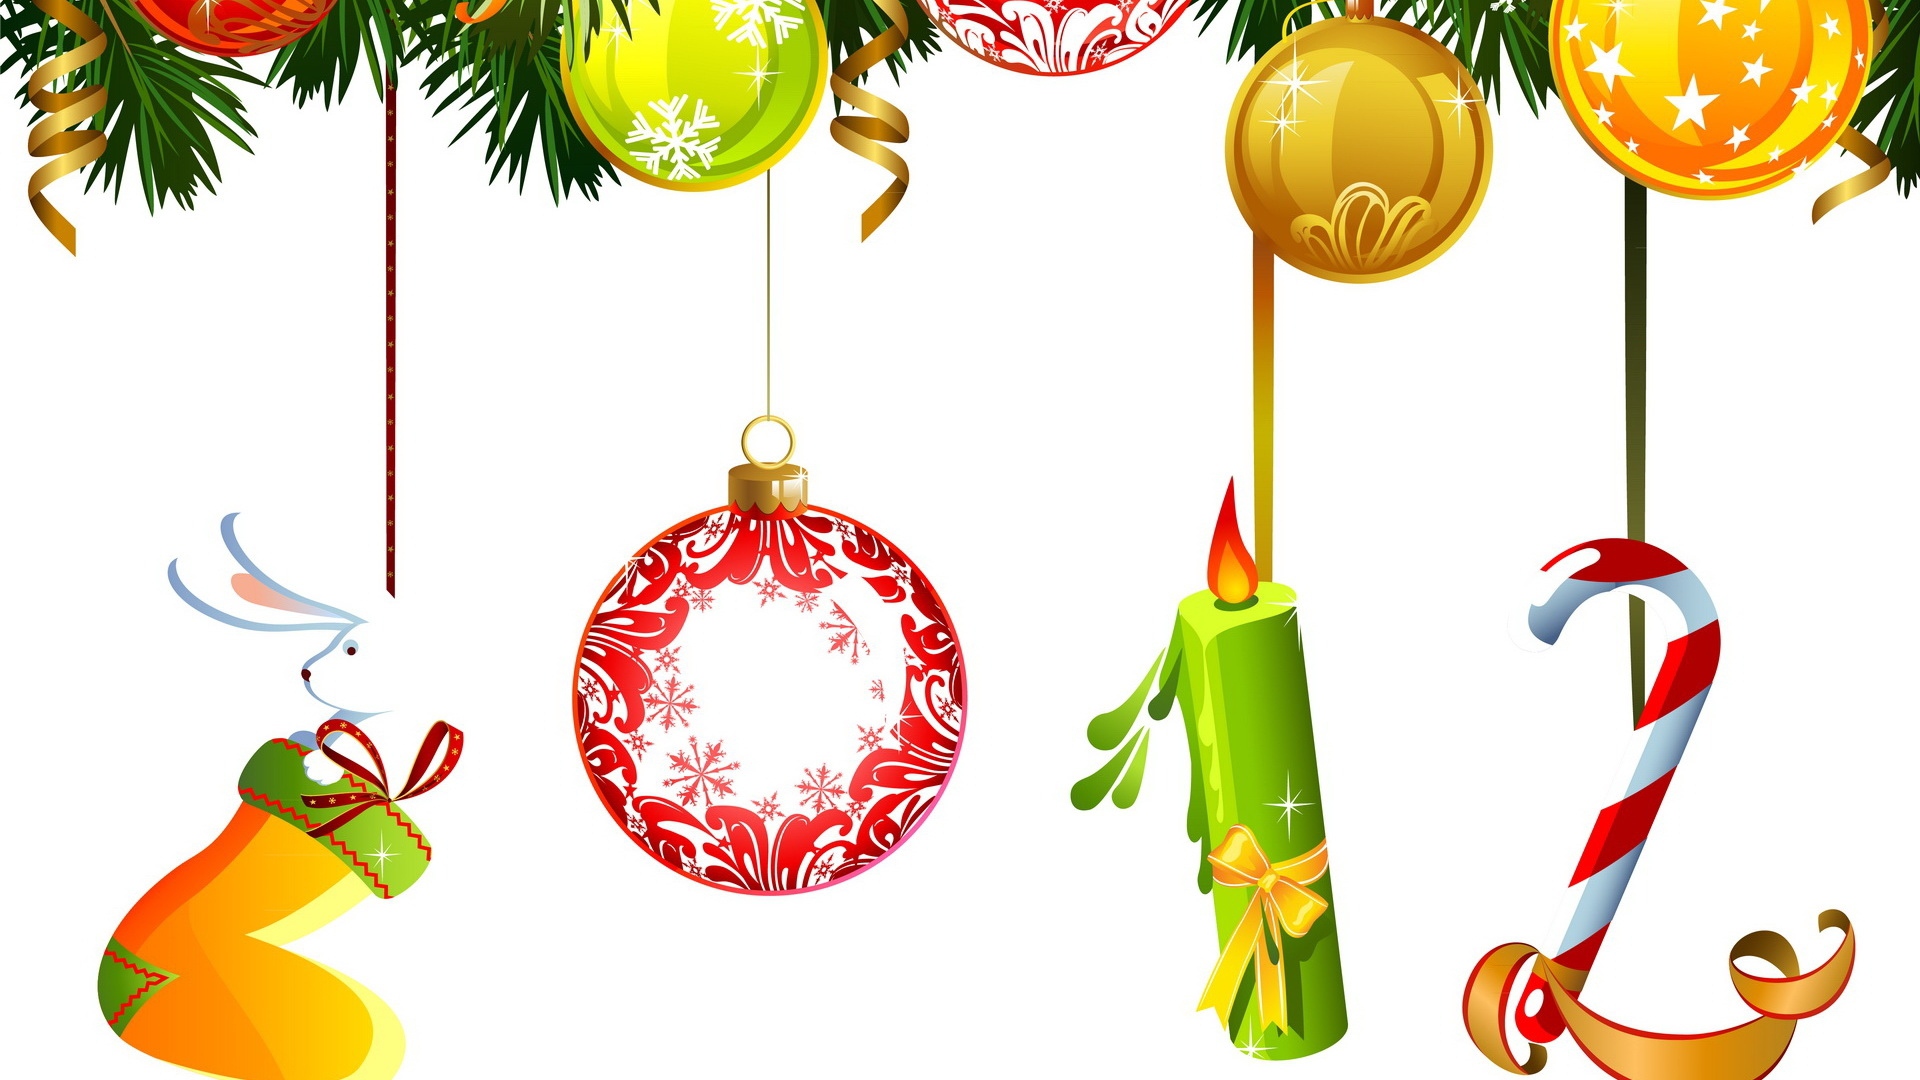 Download Wallpaper 1920x1080 new year, christmas, figures, 2012 ...